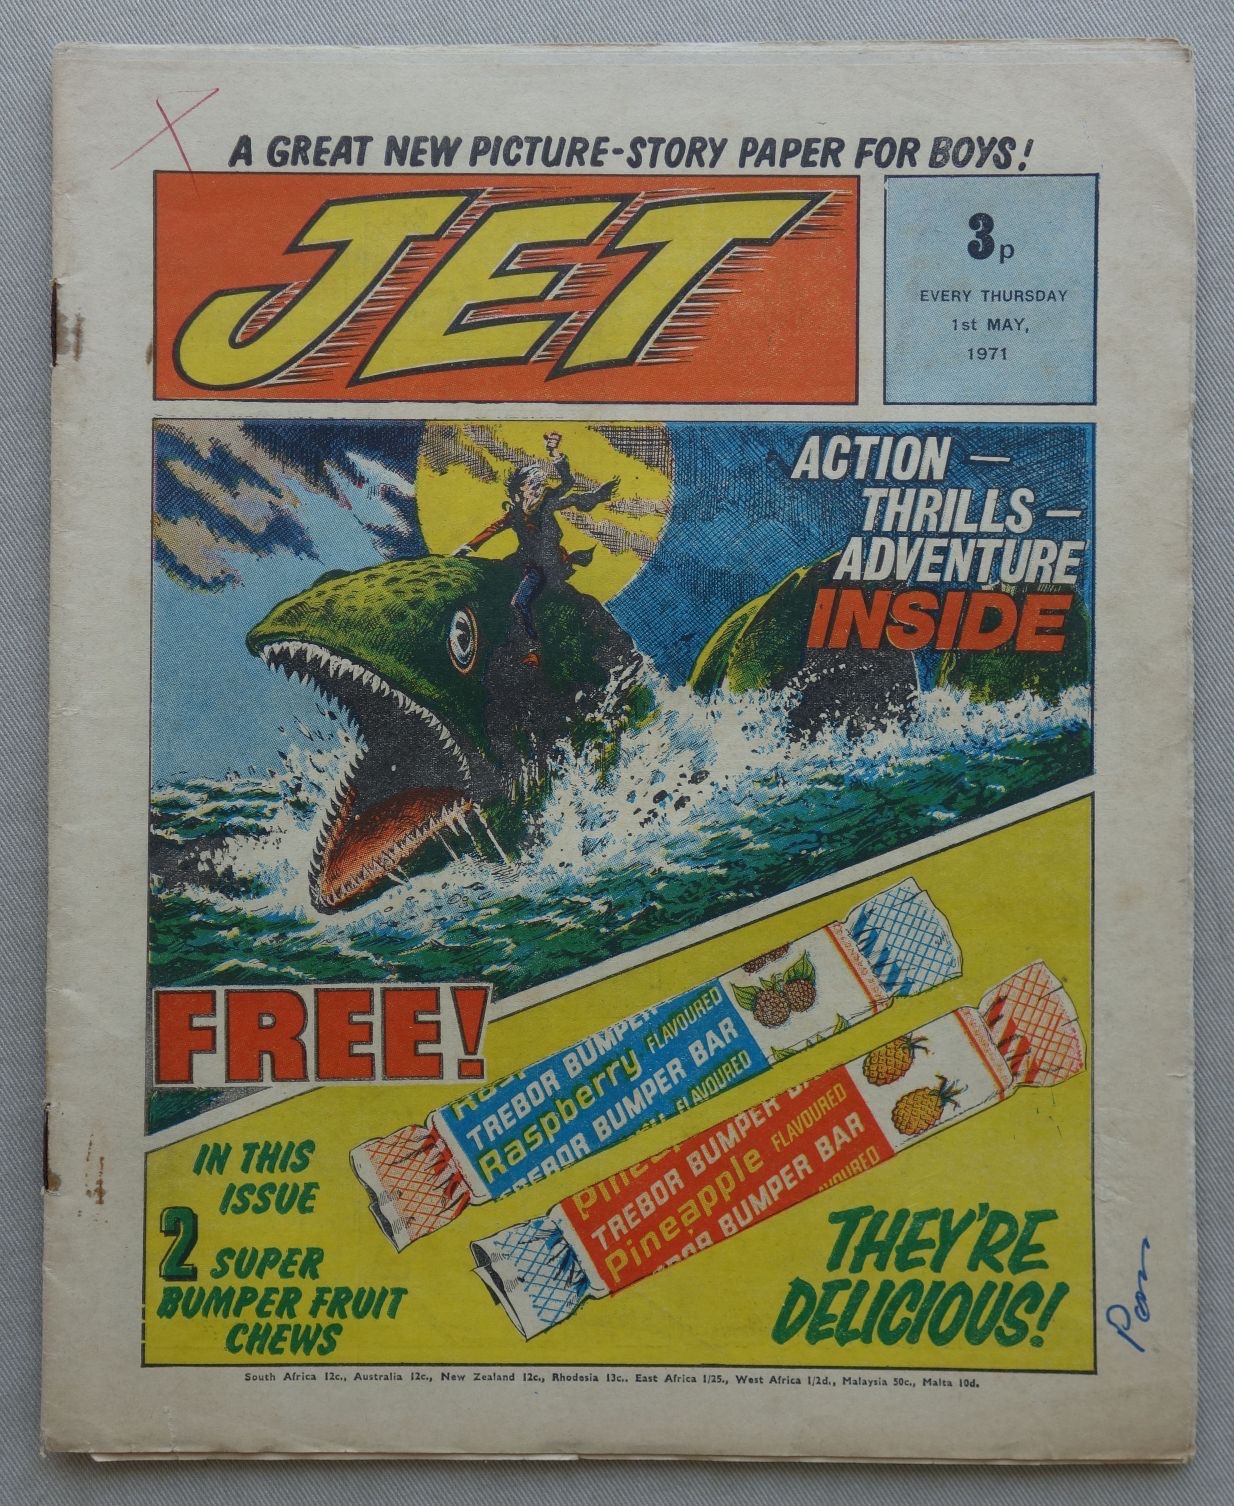 Jet No. 1 - cover dated 1st May 1971